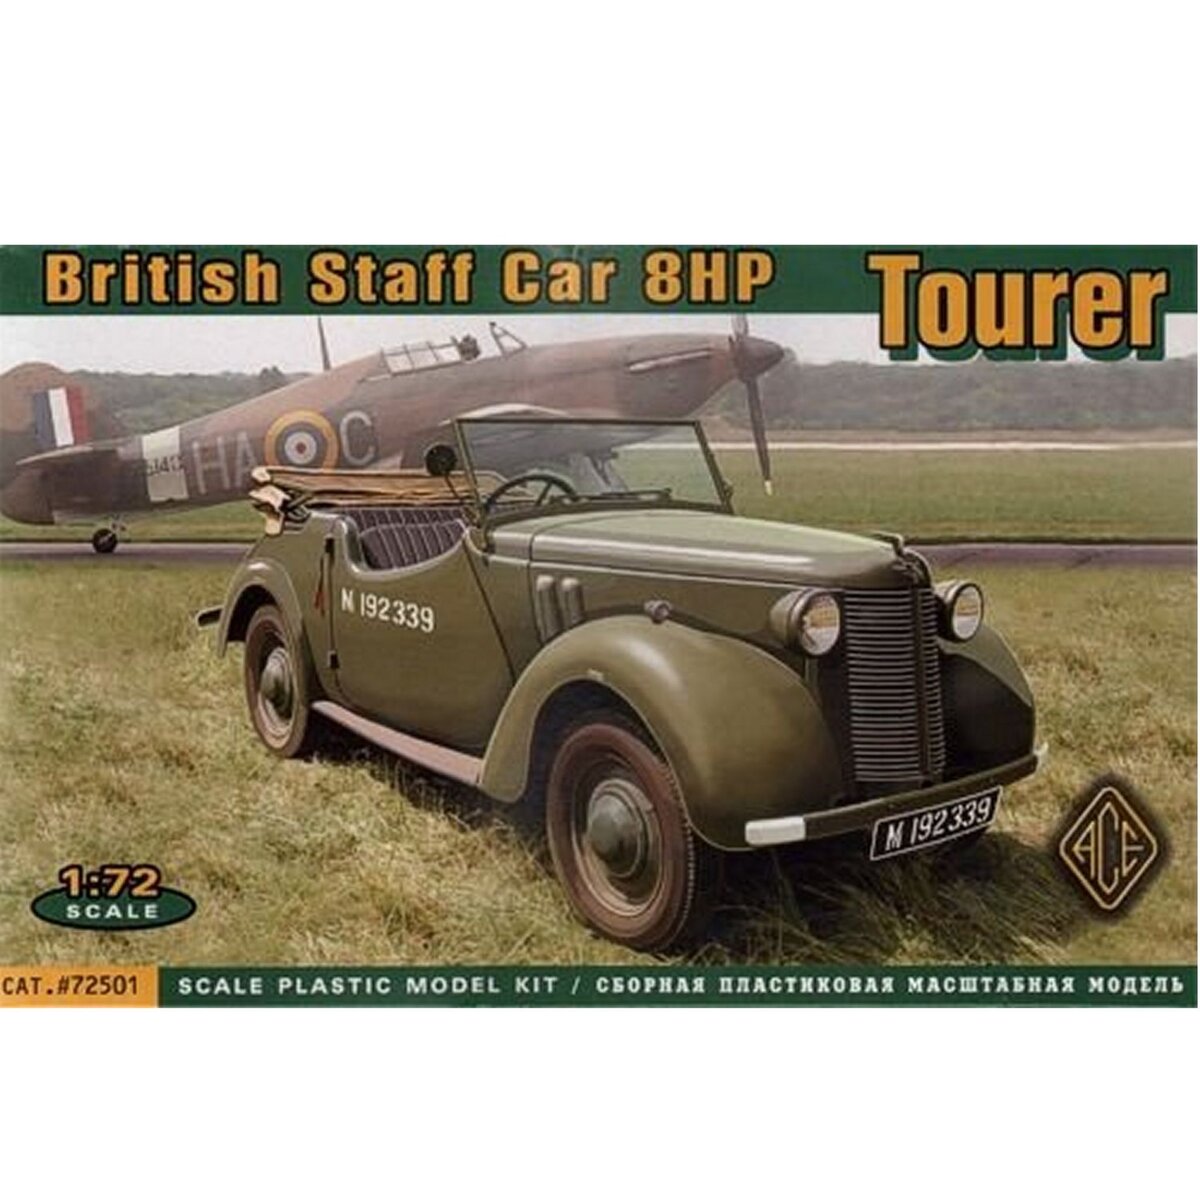 ACE Maquette véhicule militaire : British Staff Car 8 HP